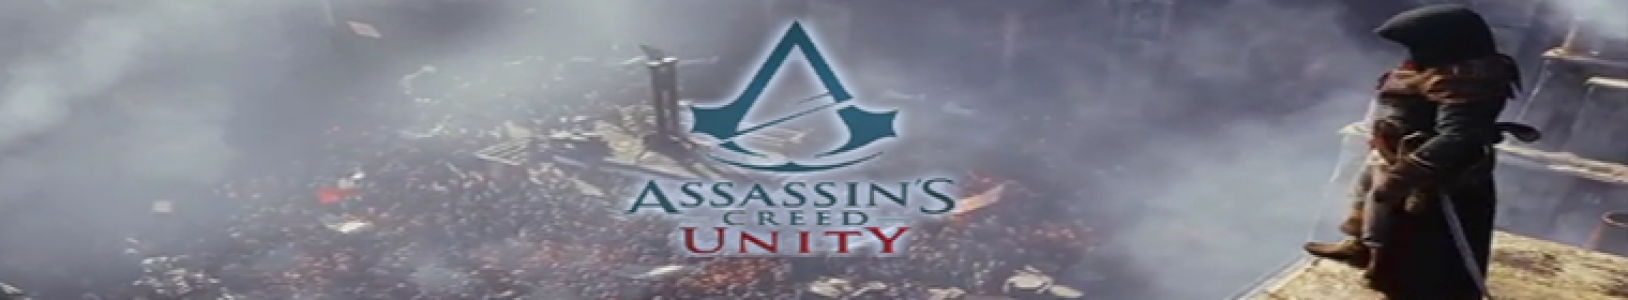 Assassin's Creed Unity banner